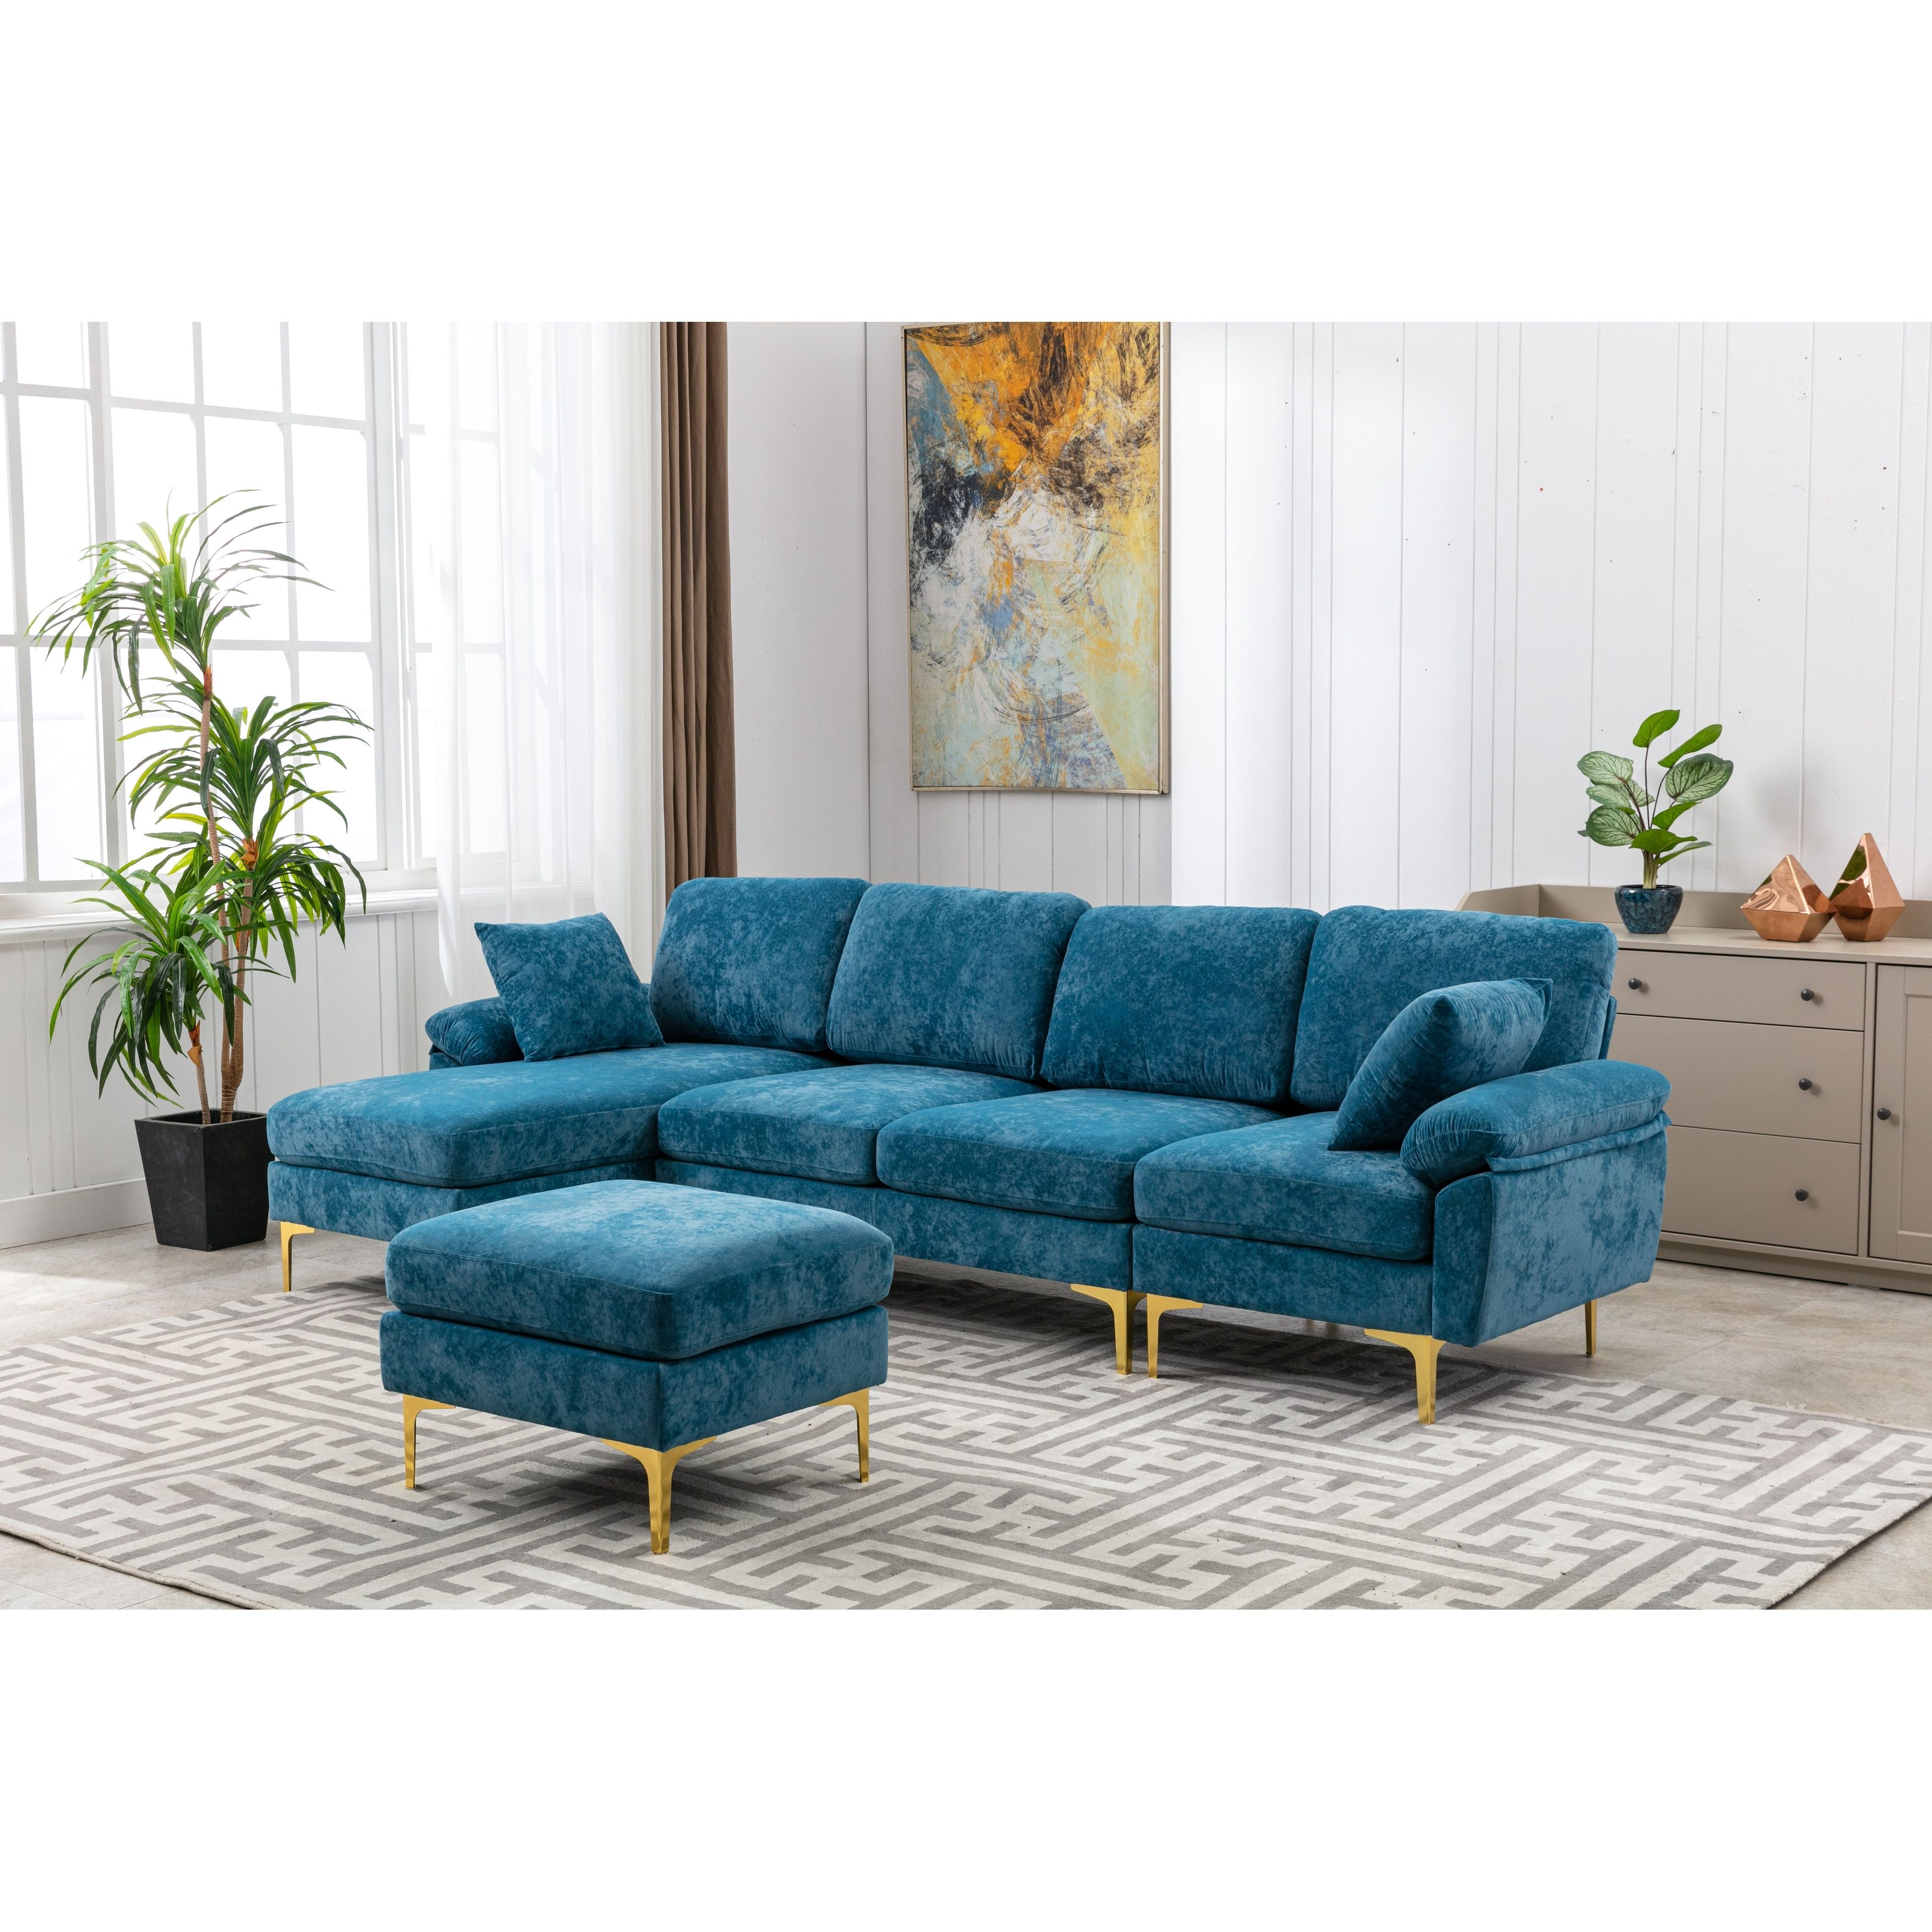 Living Room Sectional Sofa, L Shaped Upholstered Couch With Movable Ottoman,  Convertible Modular Sofa With Gold Metal Legs – – 36690154 Pertaining To Sectional Sofas With Movable Ottoman (Photo 13 of 15)